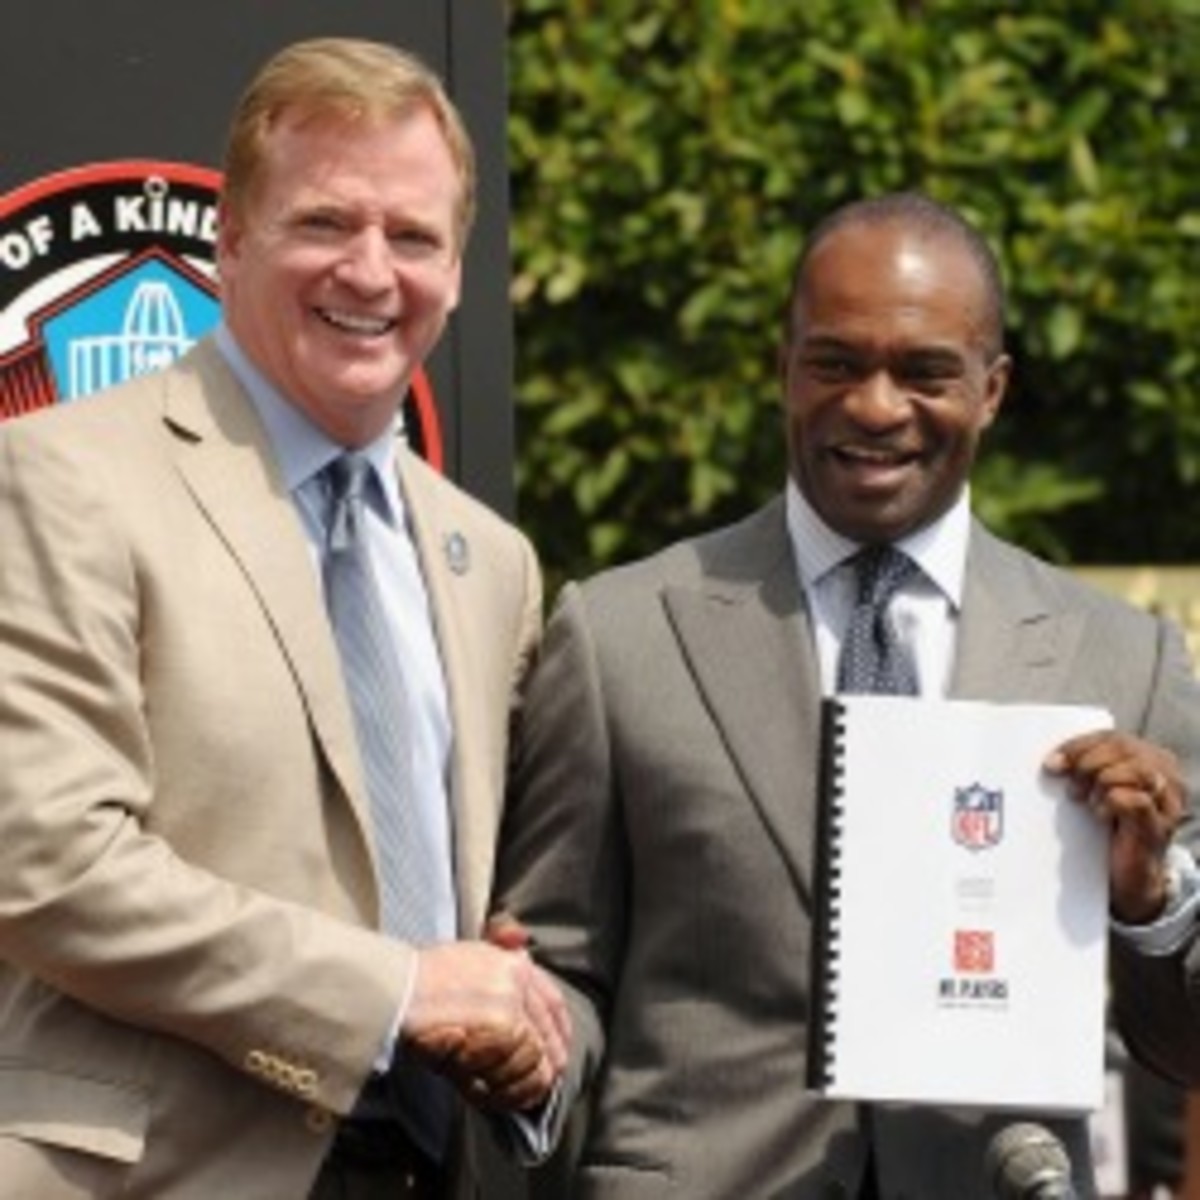 The NFL and NFLPA are in hot water with the U.S. Congress over lack of progress on HGH testing. (Michael Loccisano/Getty Images)